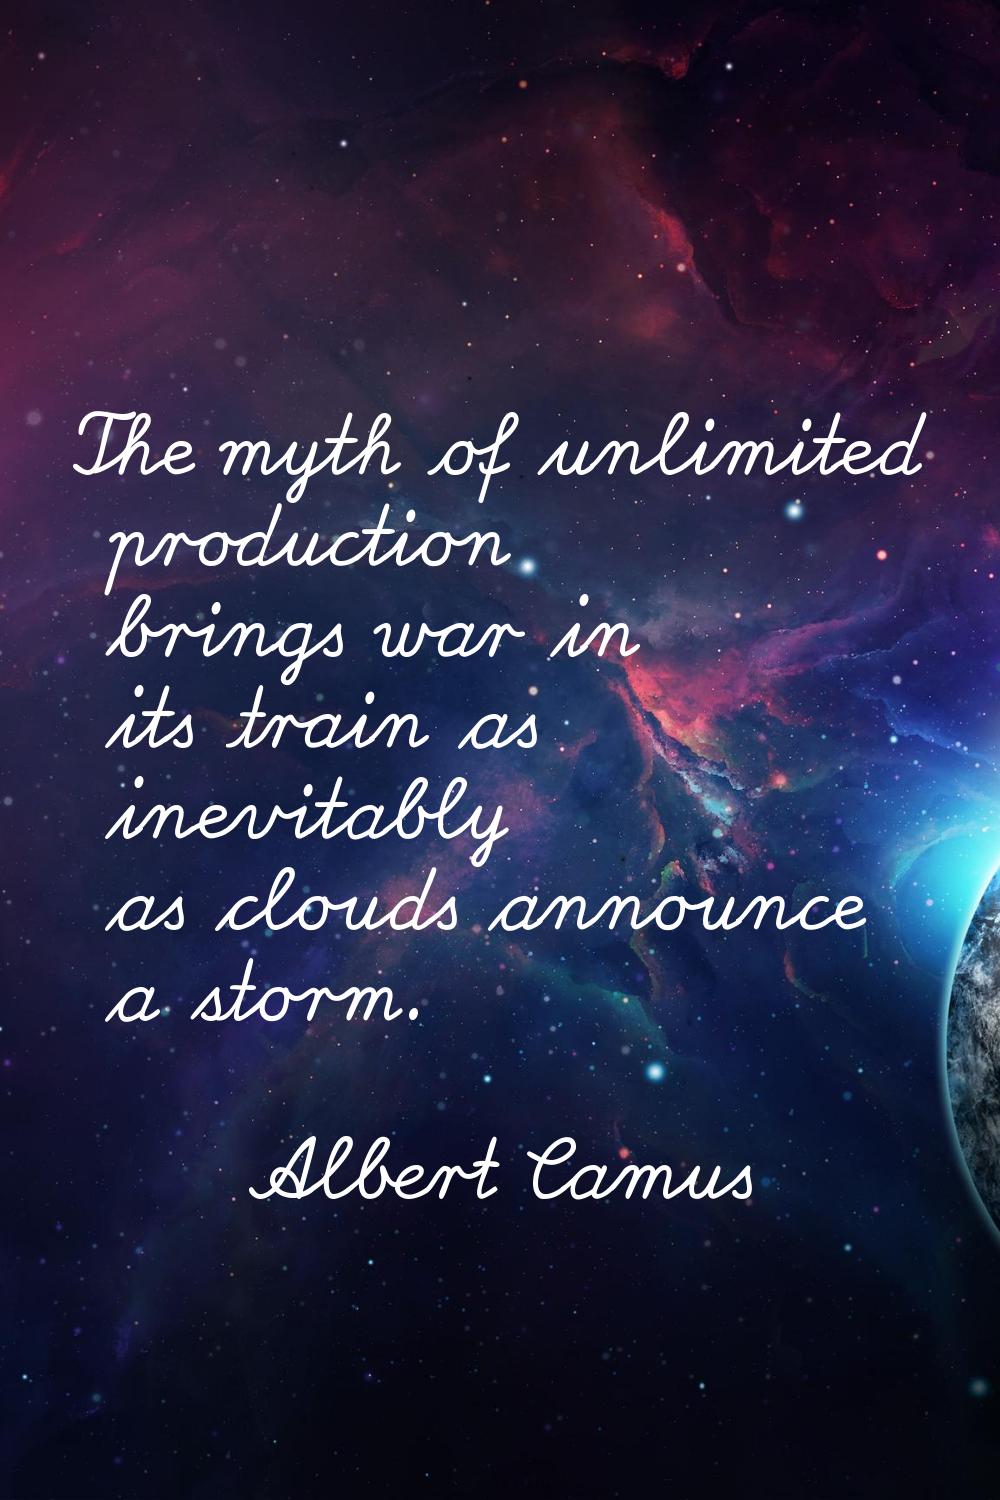 The myth of unlimited production brings war in its train as inevitably as clouds announce a storm.